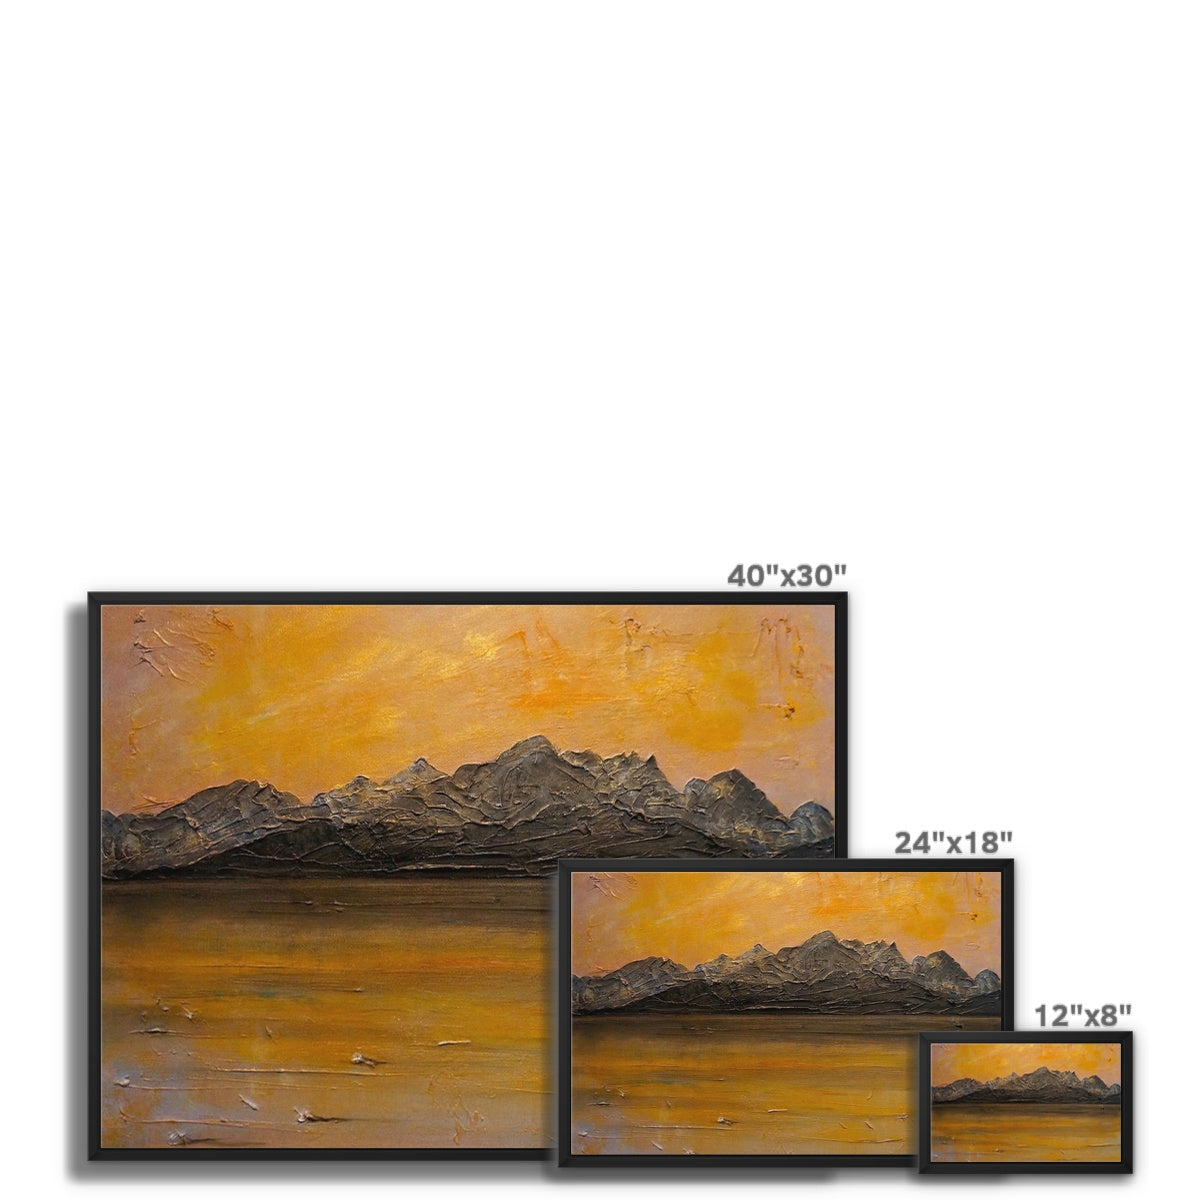 Cuillin Sunset Skye Painting | Framed Canvas From Scotland-Floating Framed Canvas Prints-Skye Art Gallery-Paintings, Prints, Homeware, Art Gifts From Scotland By Scottish Artist Kevin Hunter